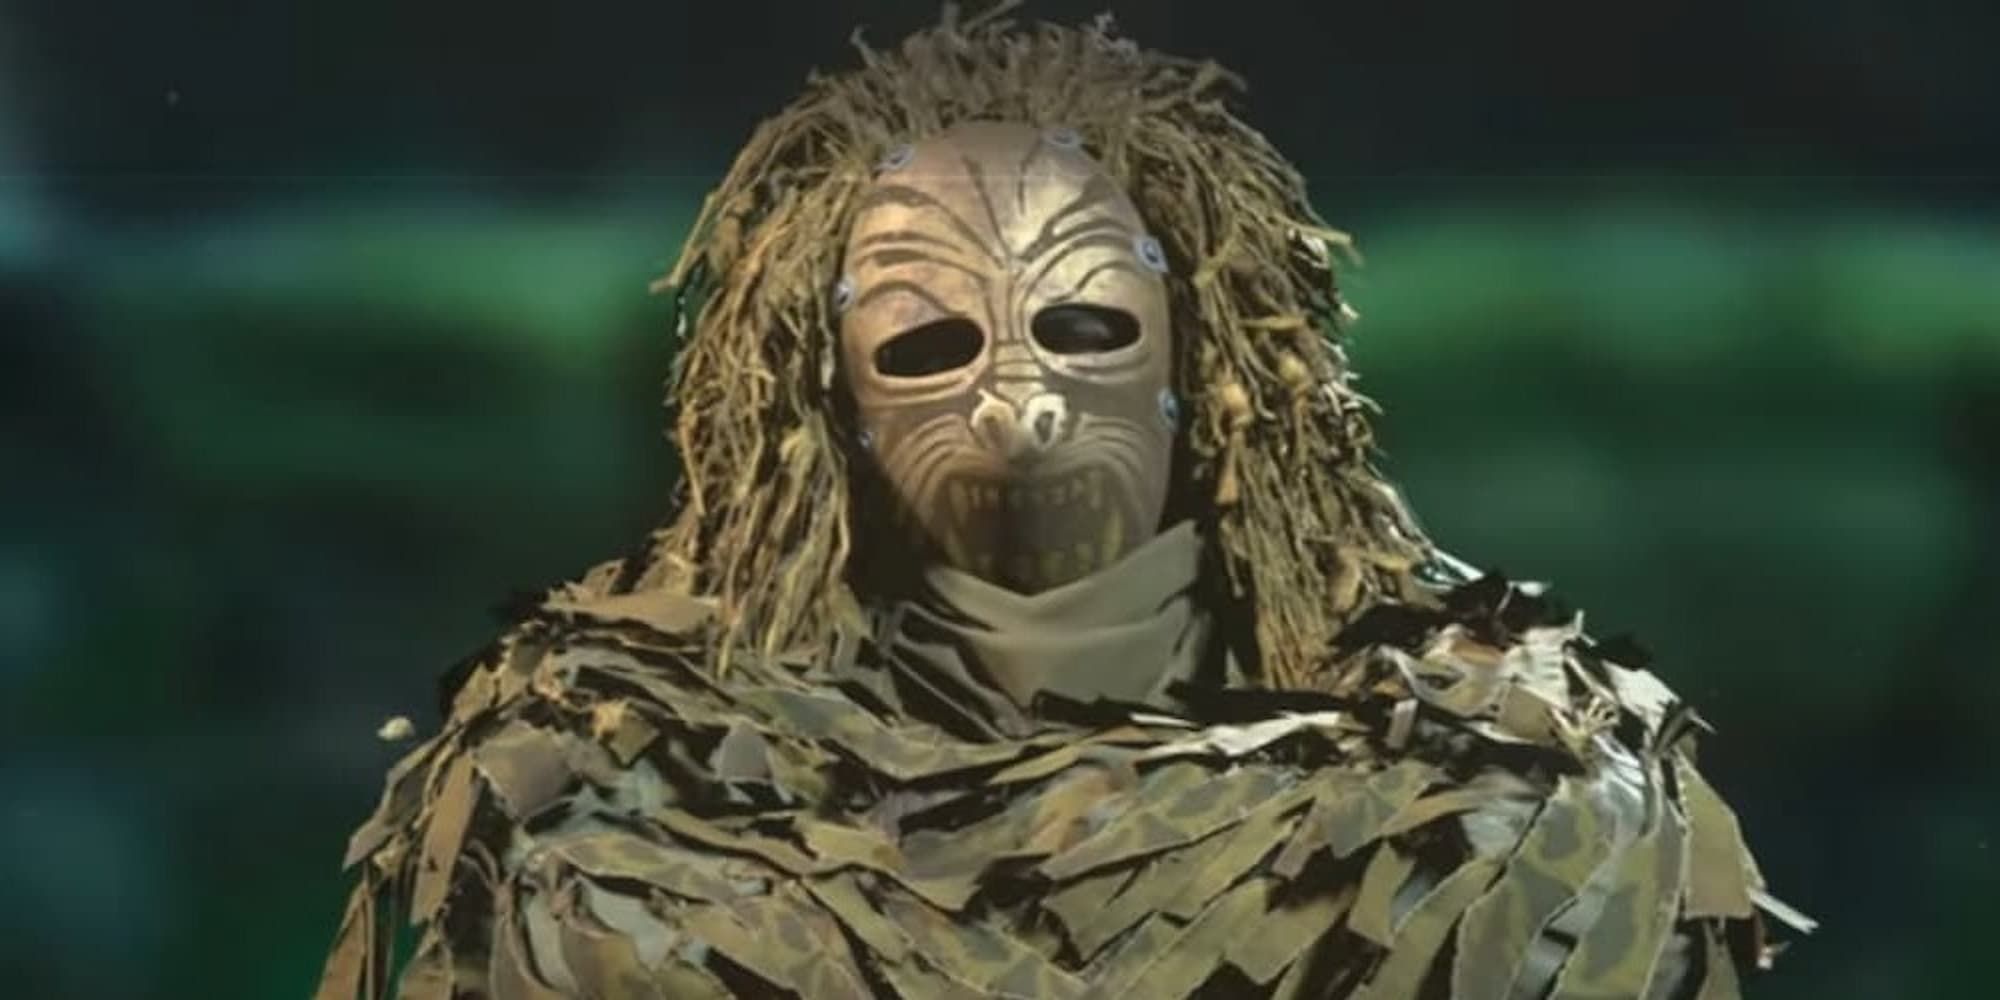 The Ghillie Monster skin in MW2 is a typical ghillie suit, but with an intimidating tribal-like mask covering the face.